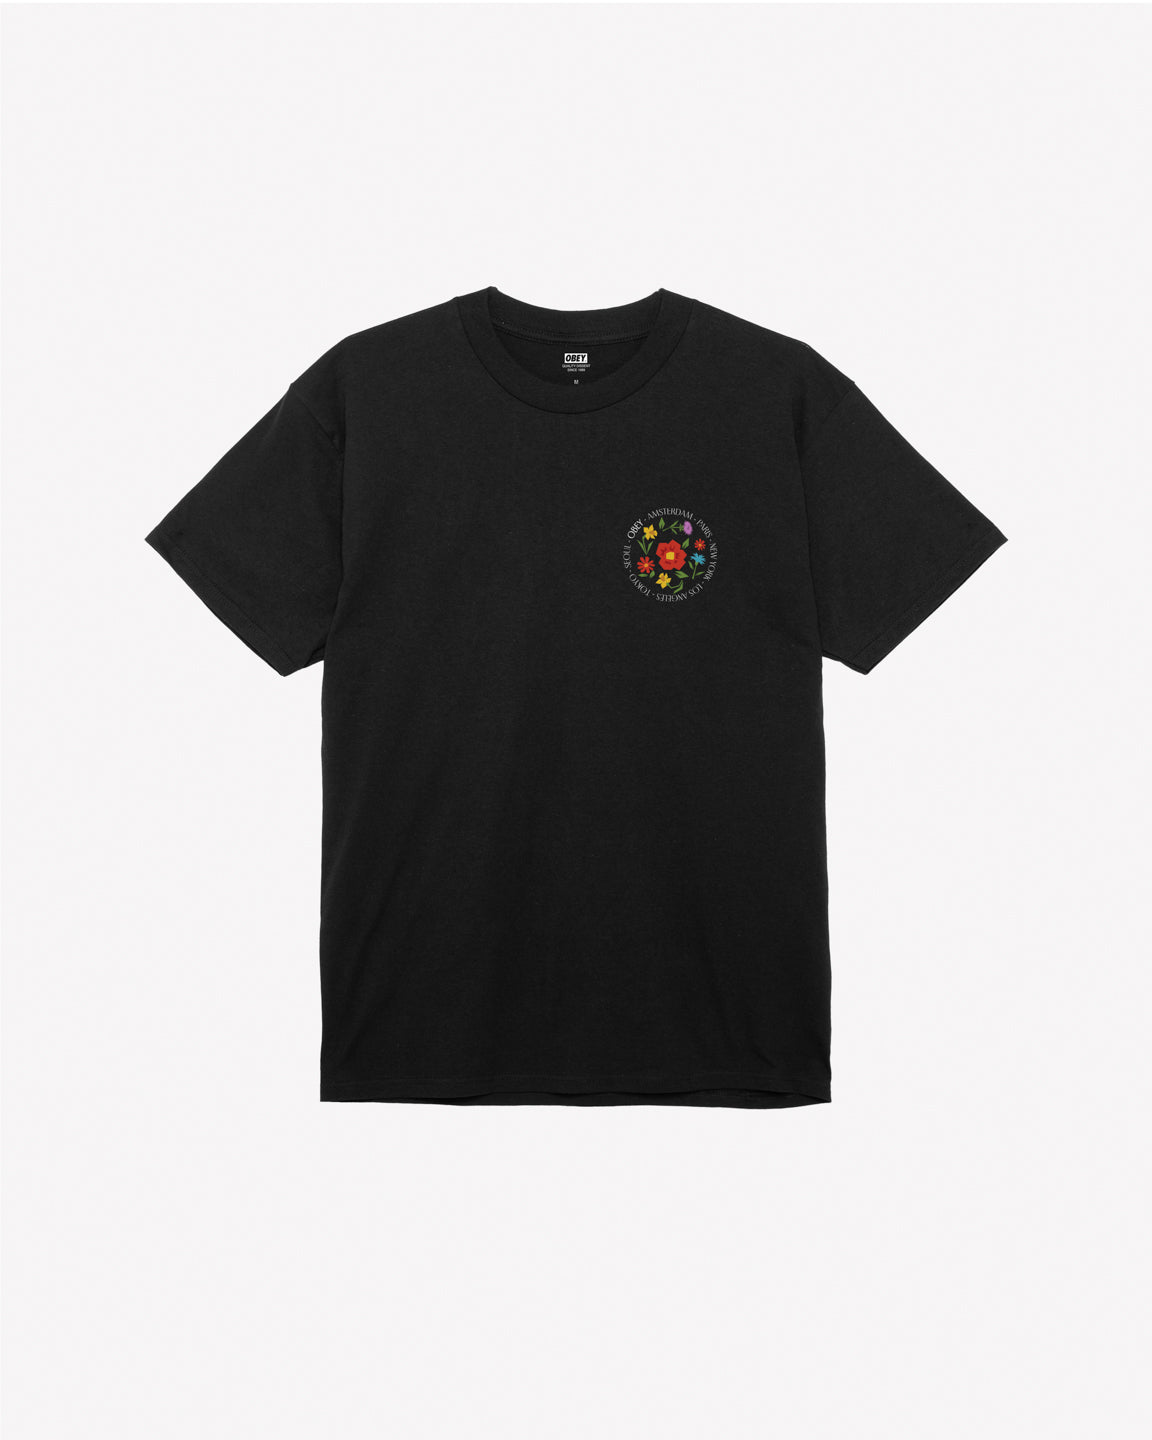 OBEY CITY FLOWERS TEE